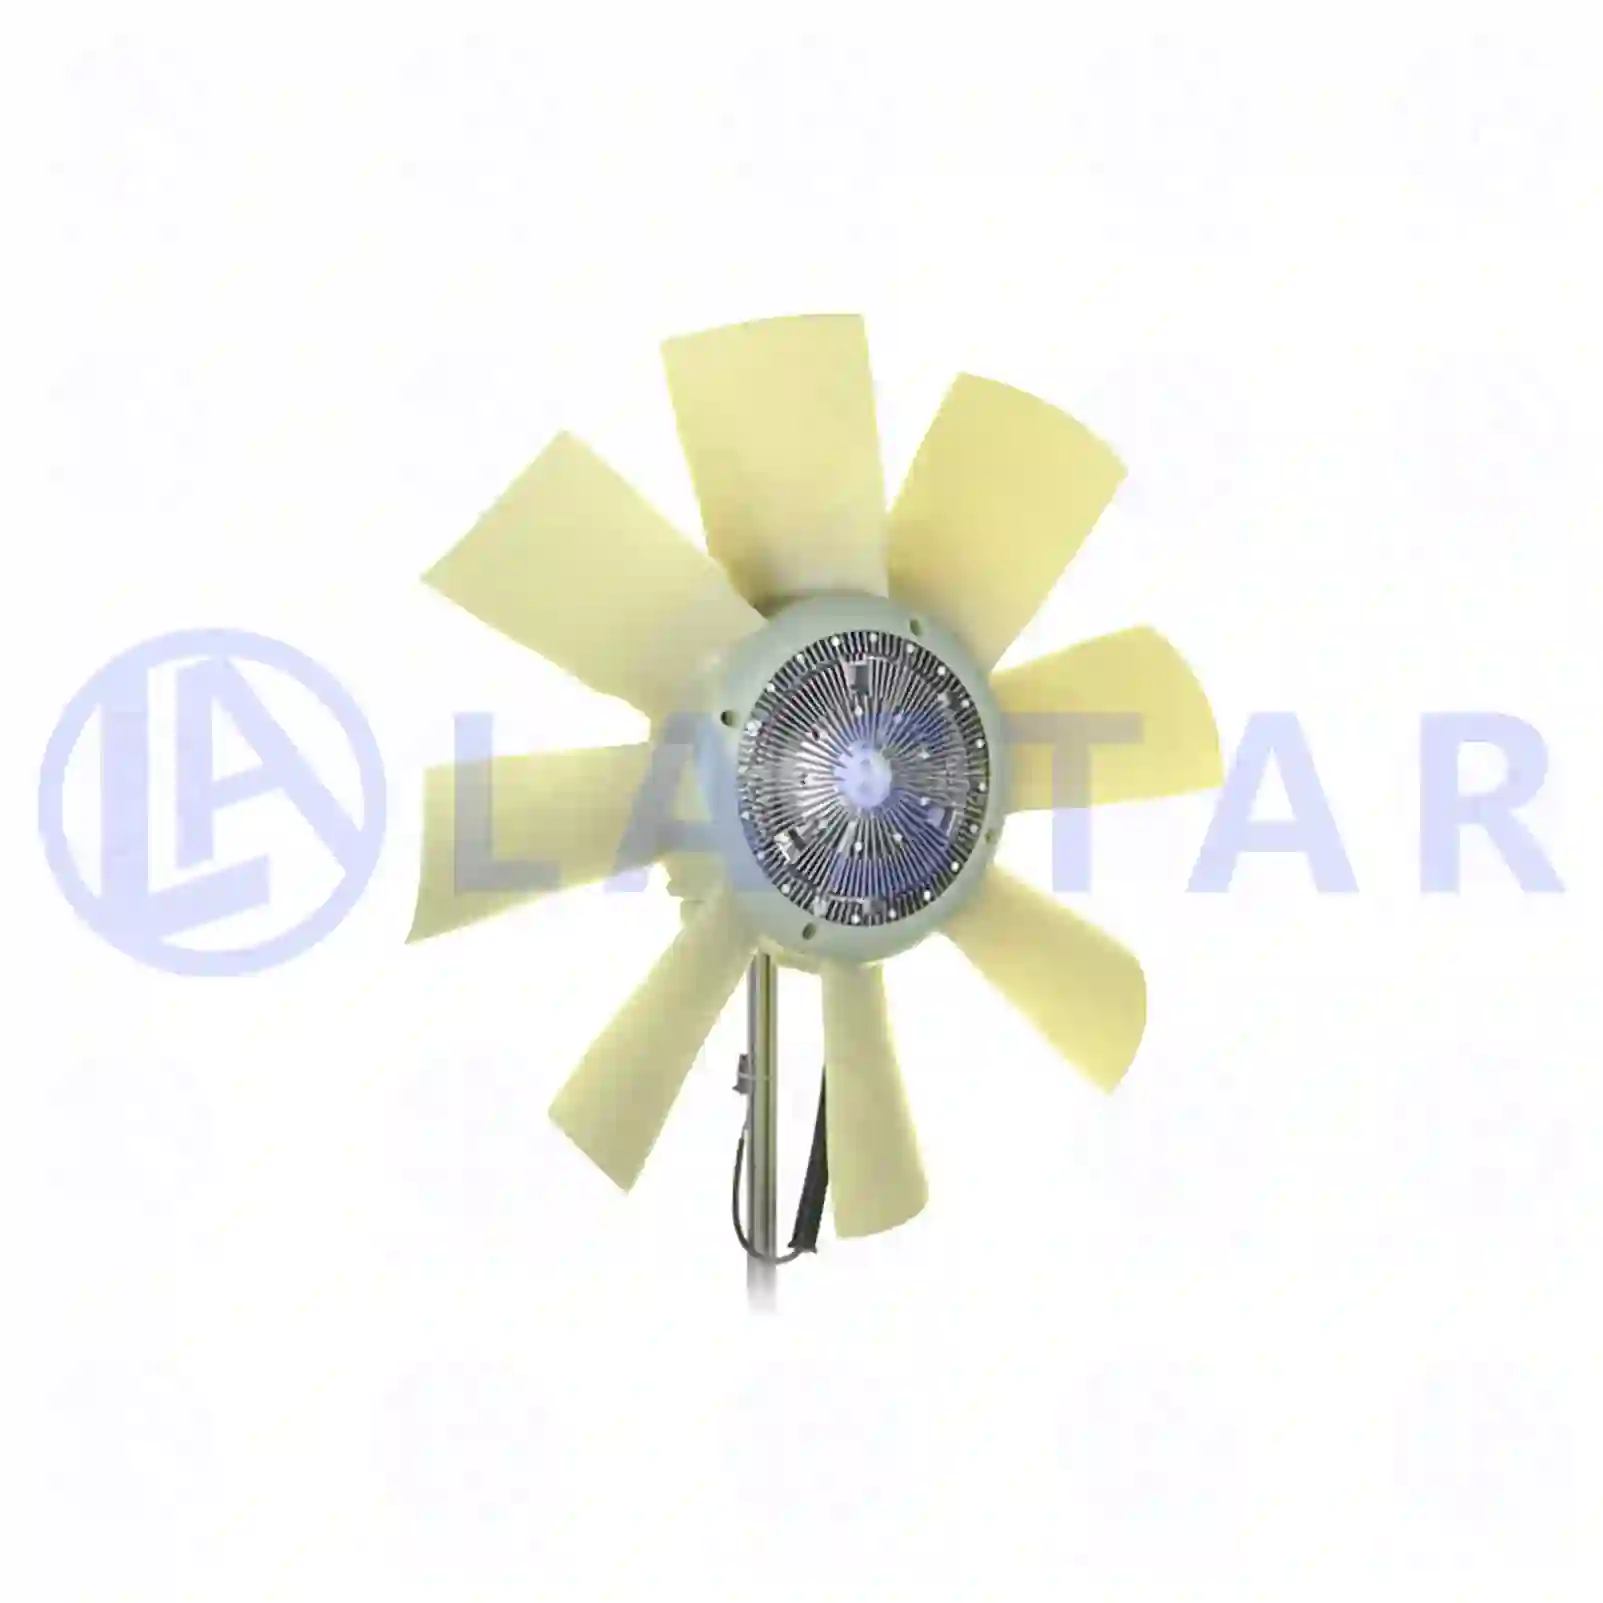 Fan with clutch, 77709940, 1776854, 2006531, 2132262, 2410084 ||  77709940 Lastar Spare Part | Truck Spare Parts, Auotomotive Spare Parts Fan with clutch, 77709940, 1776854, 2006531, 2132262, 2410084 ||  77709940 Lastar Spare Part | Truck Spare Parts, Auotomotive Spare Parts